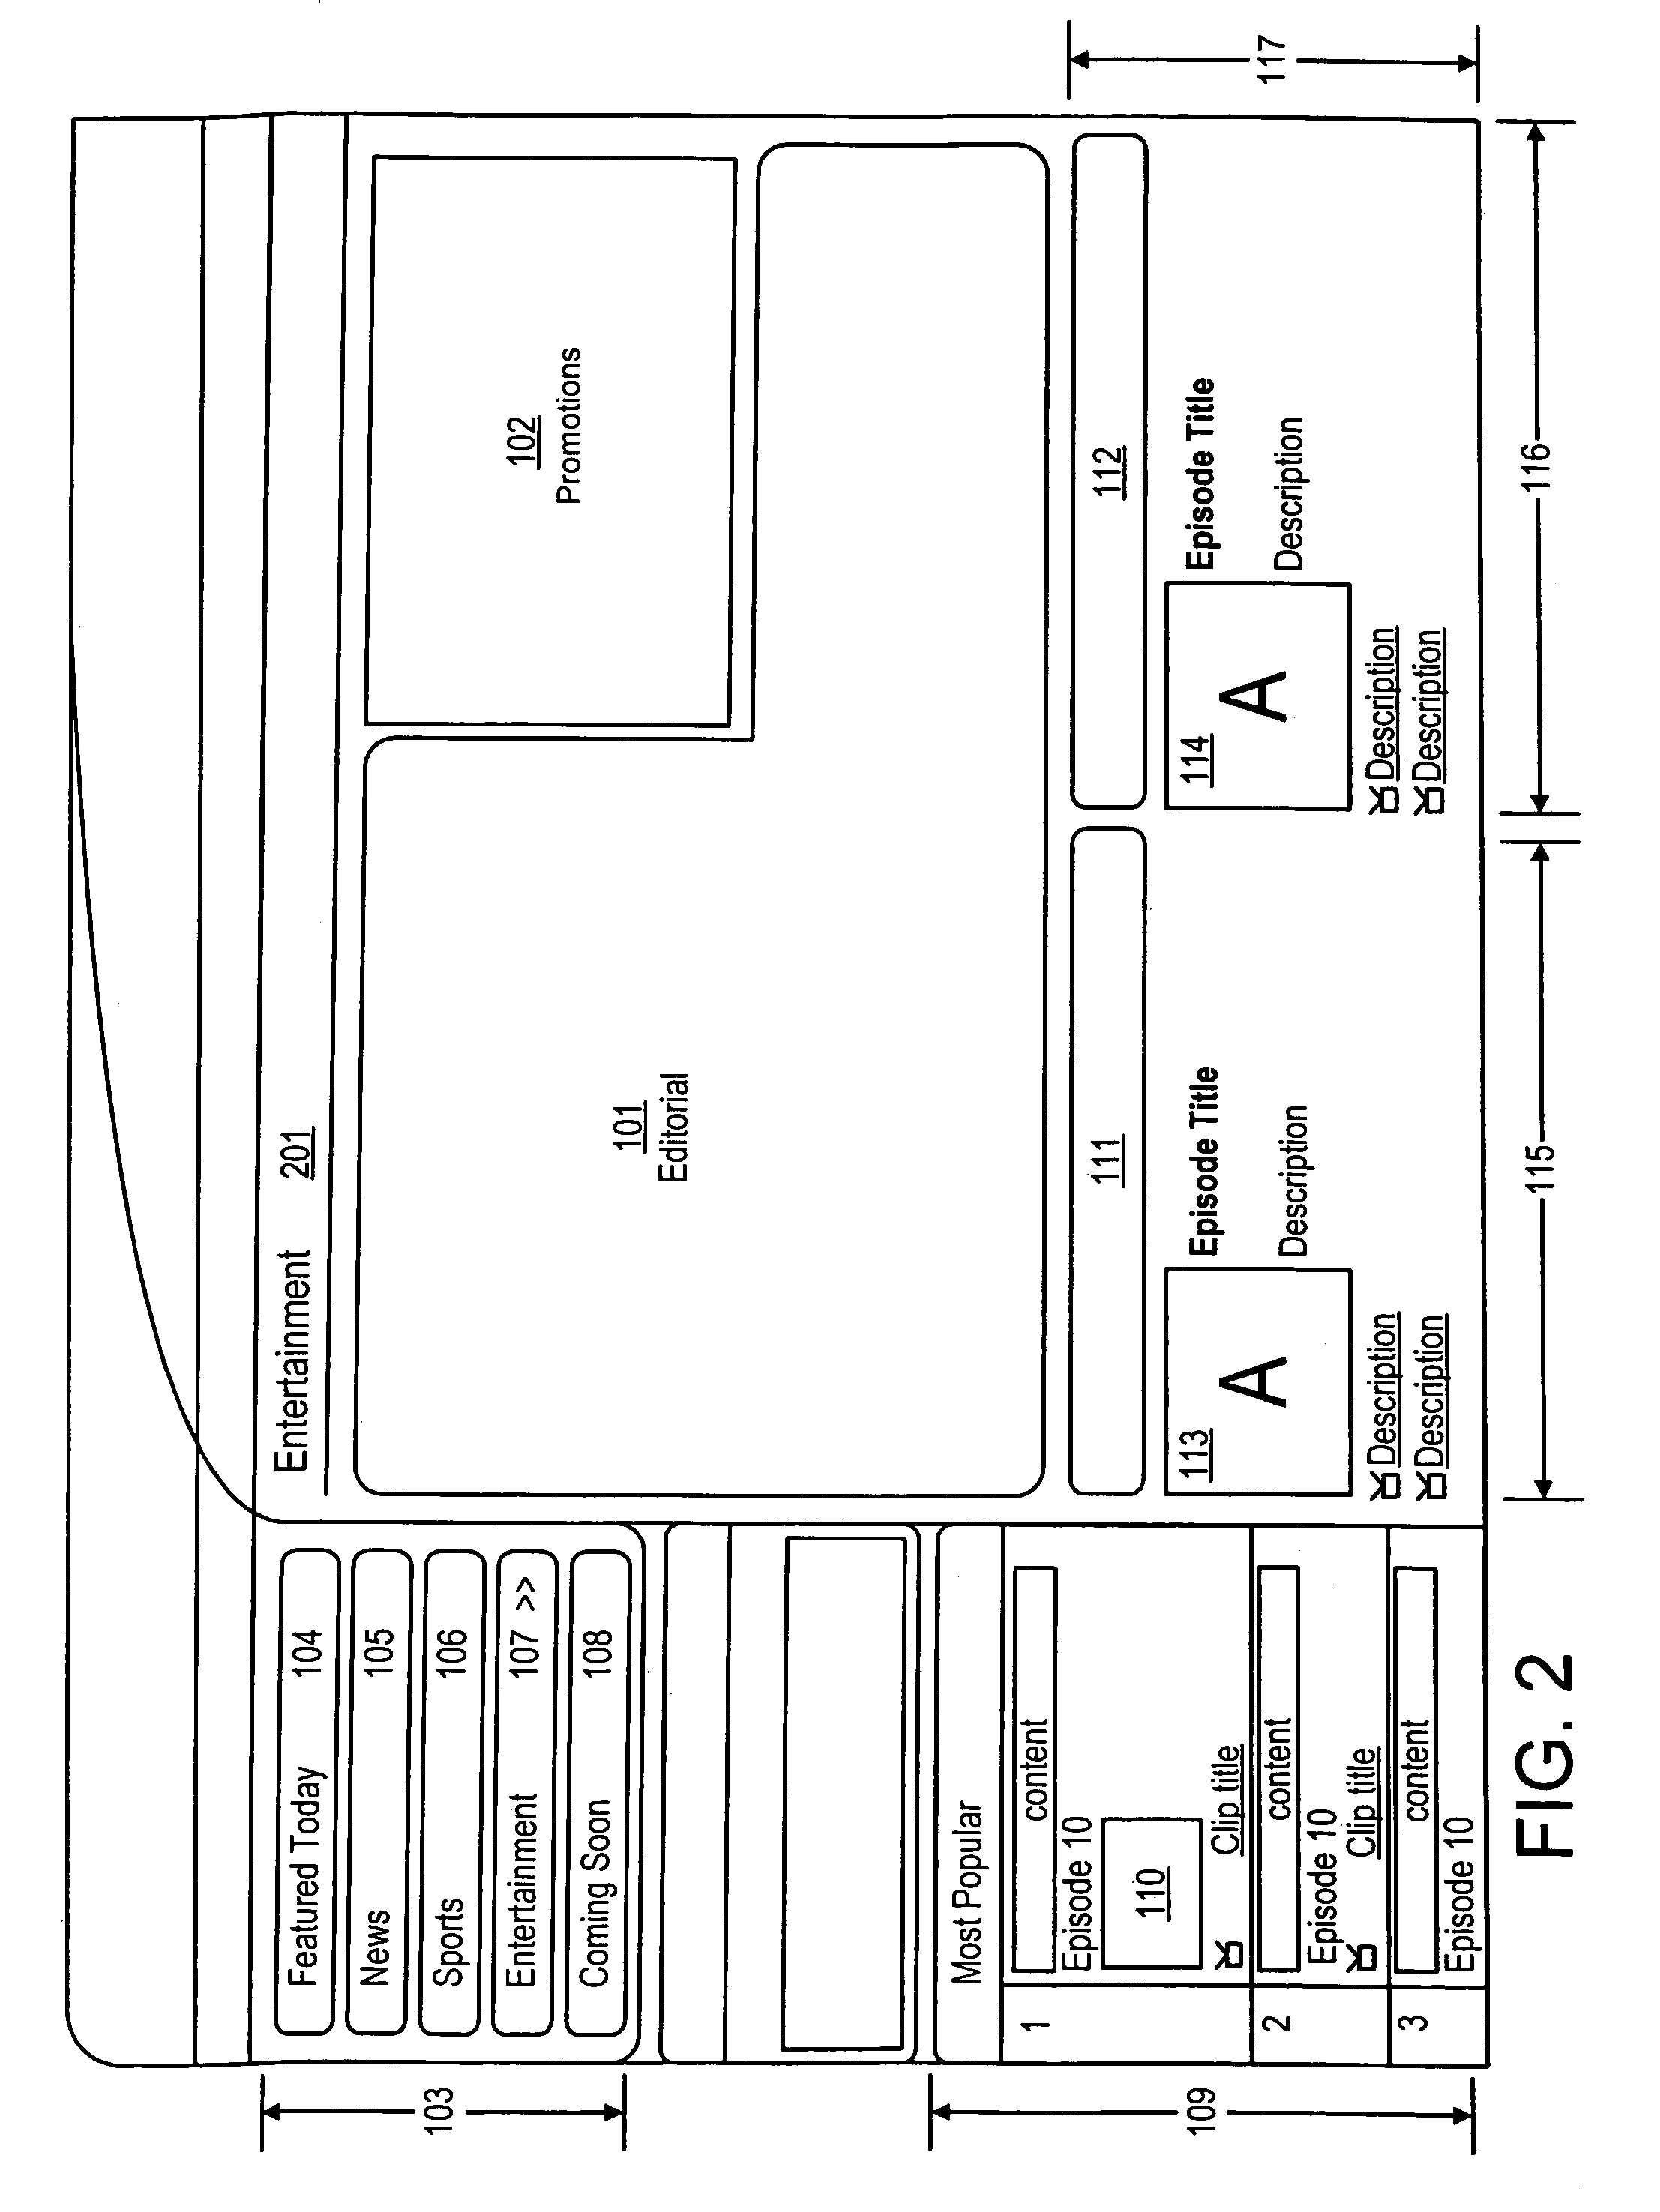 Method and apparatus for organizing and playing data